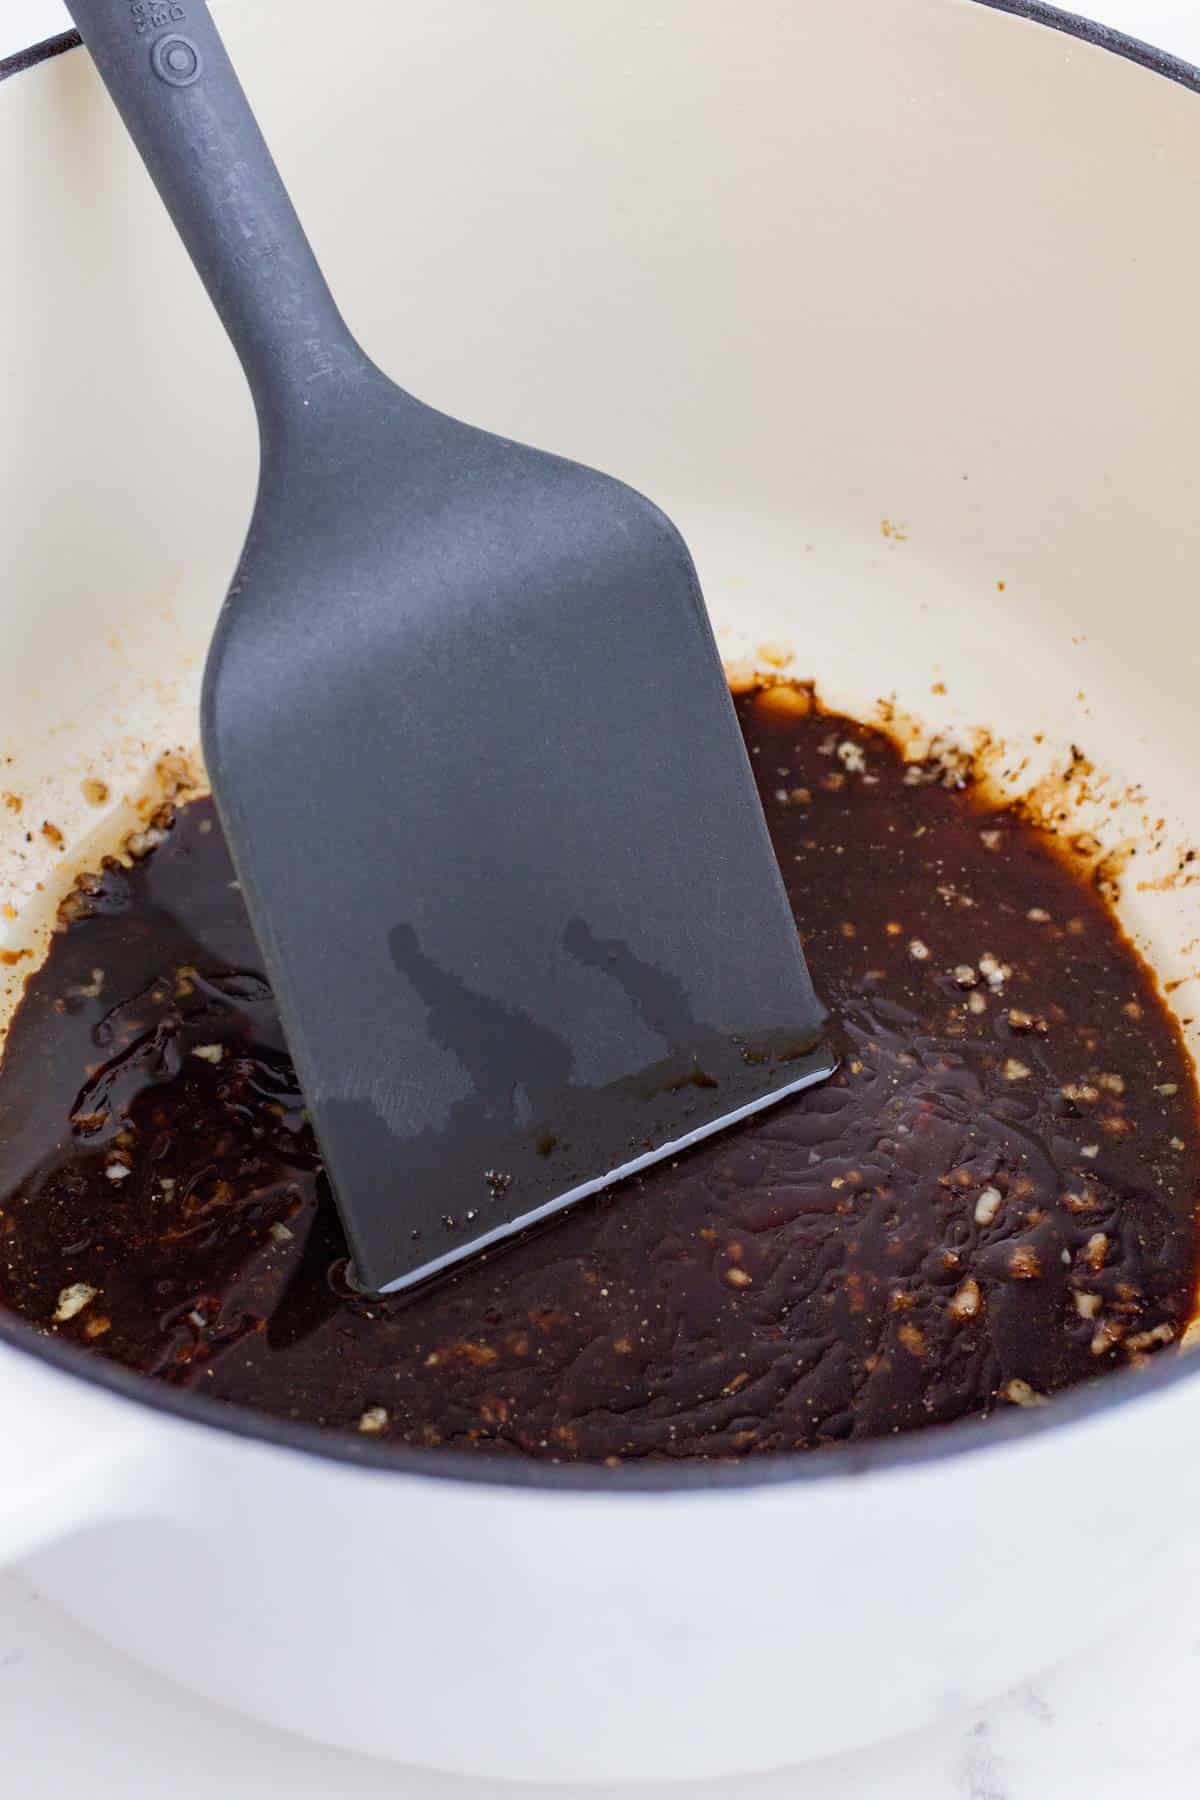 Balsamic vinegar and brown sugar are added to make a reduction.